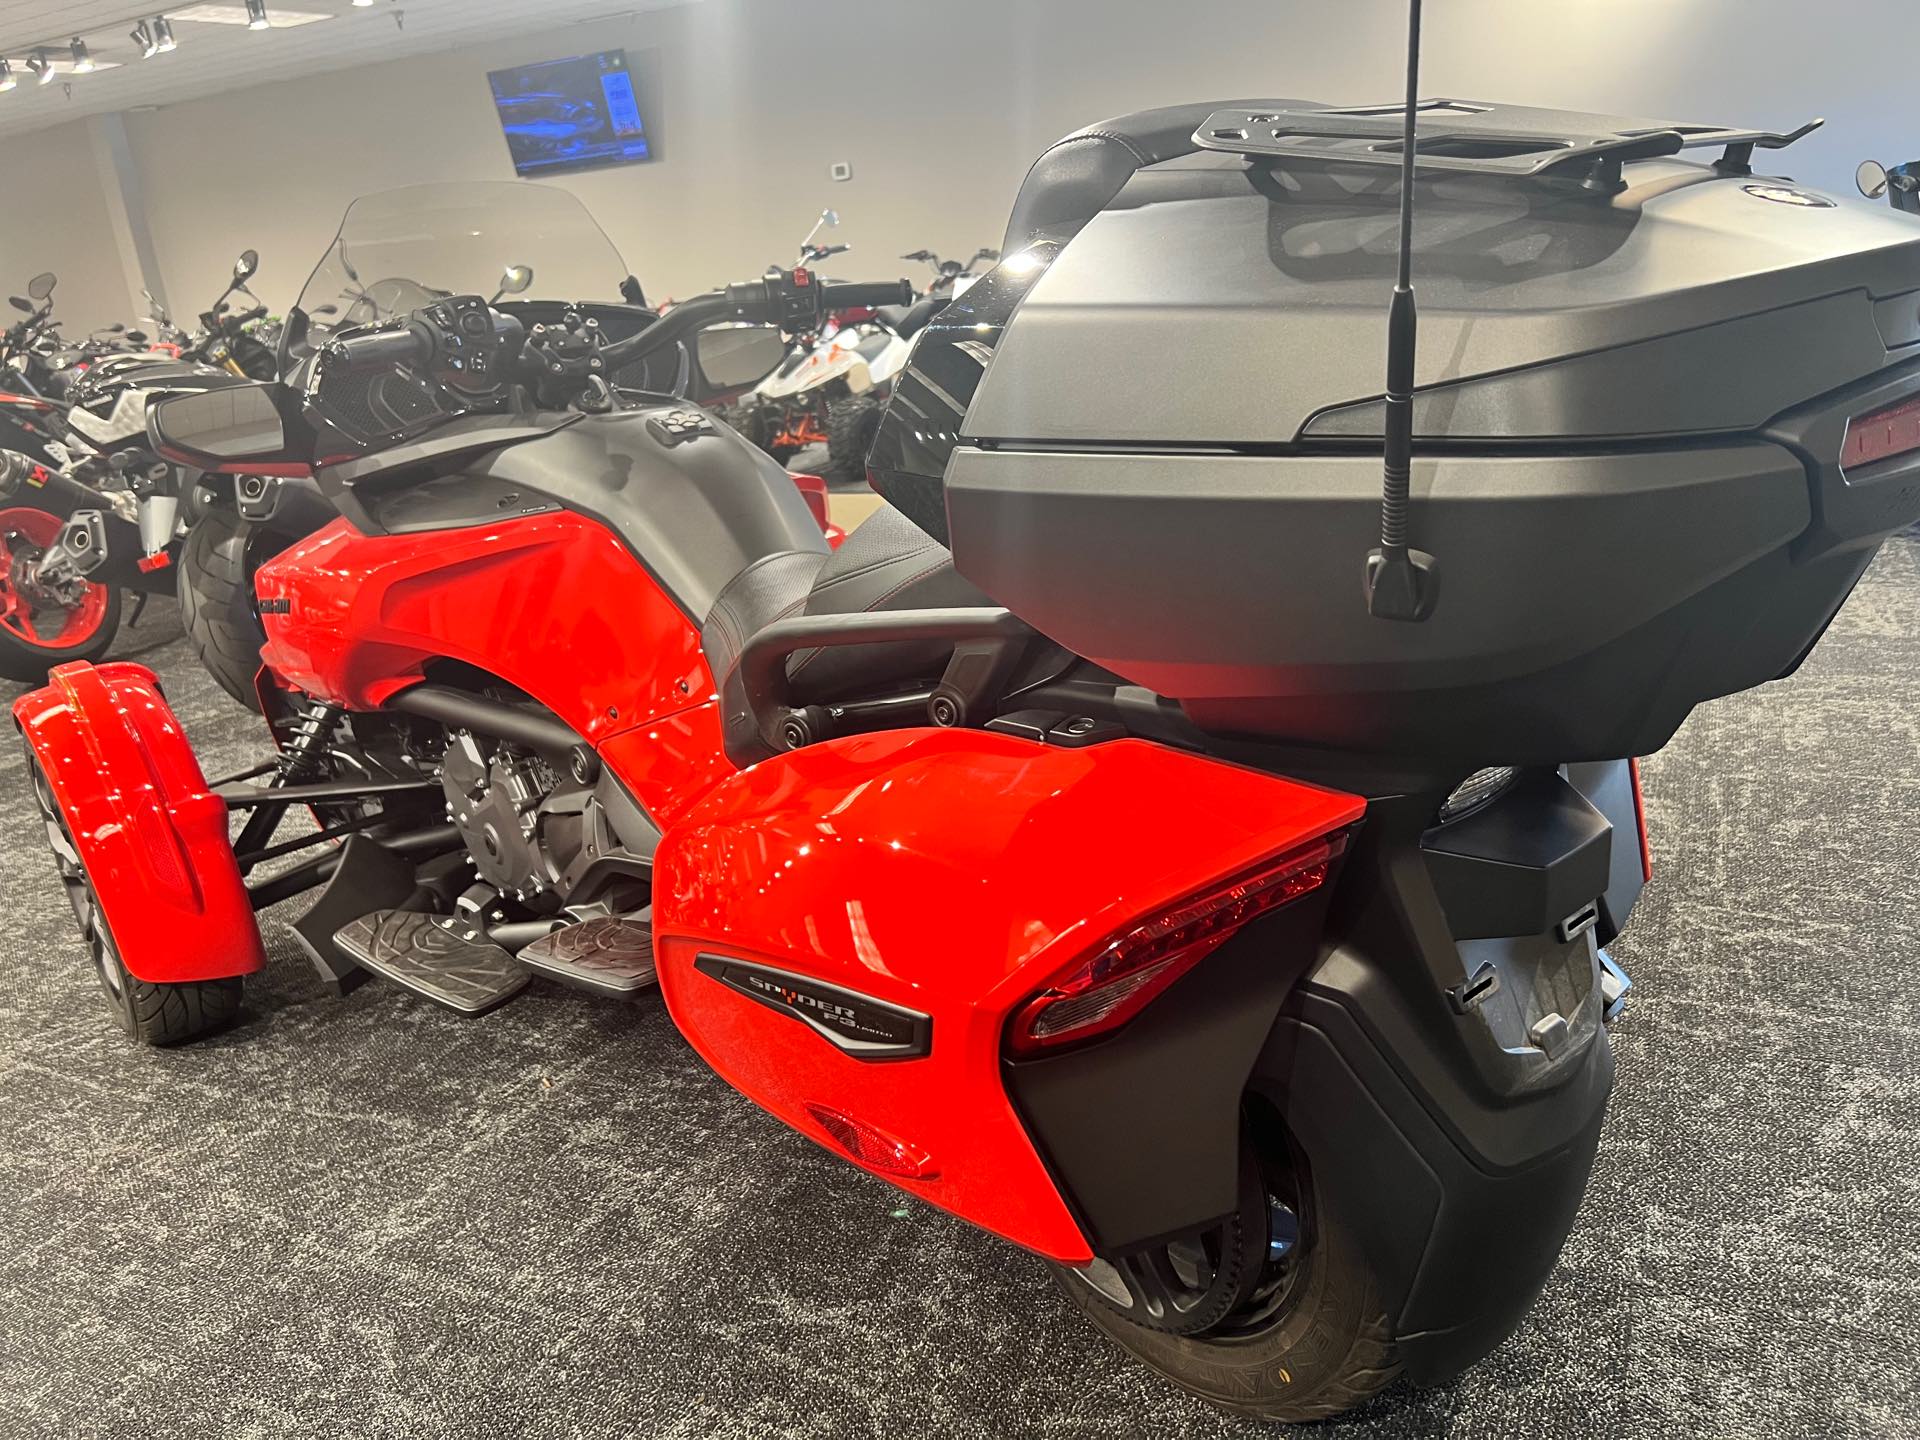 2022 Can-Am Spyder F3 Limited Special Series at Sloans Motorcycle ATV, Murfreesboro, TN, 37129